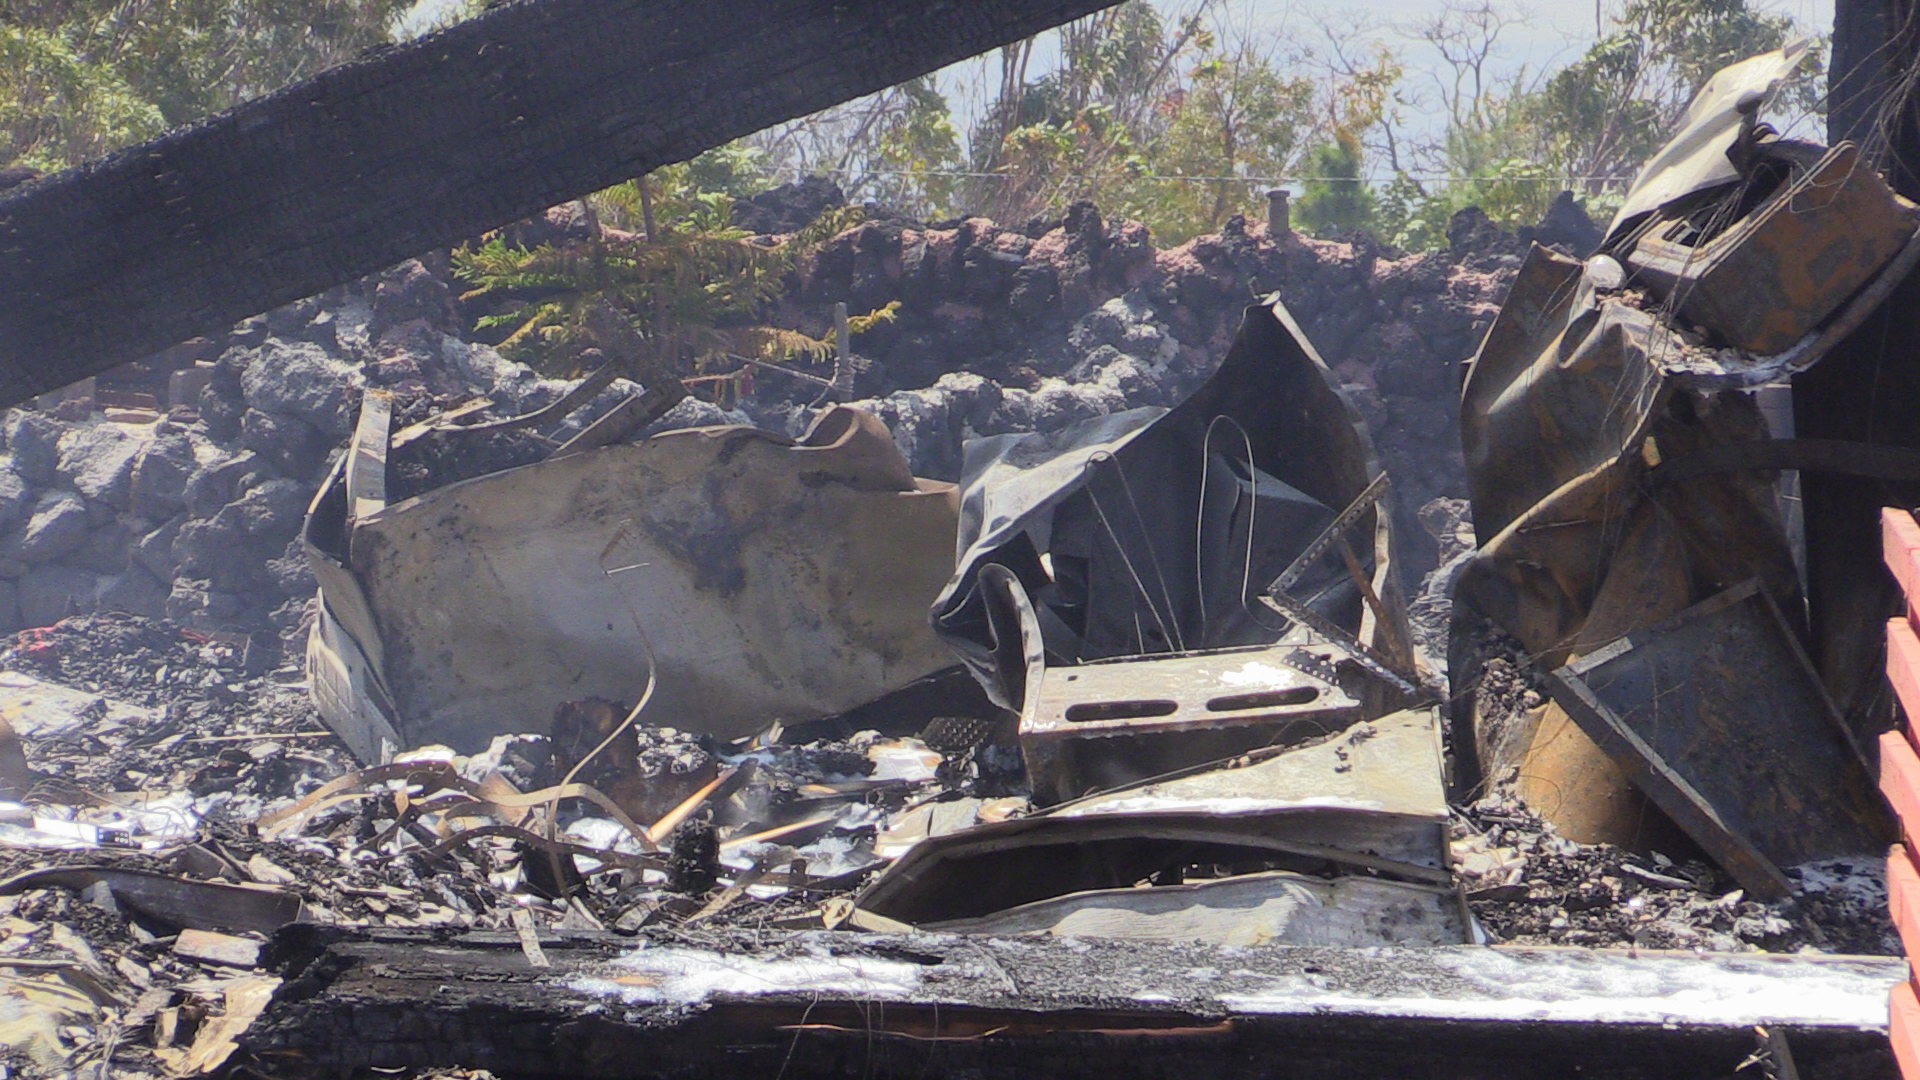 All that's left of an Ocean View home following a Friday structure fire. Image by Daryl Lee.